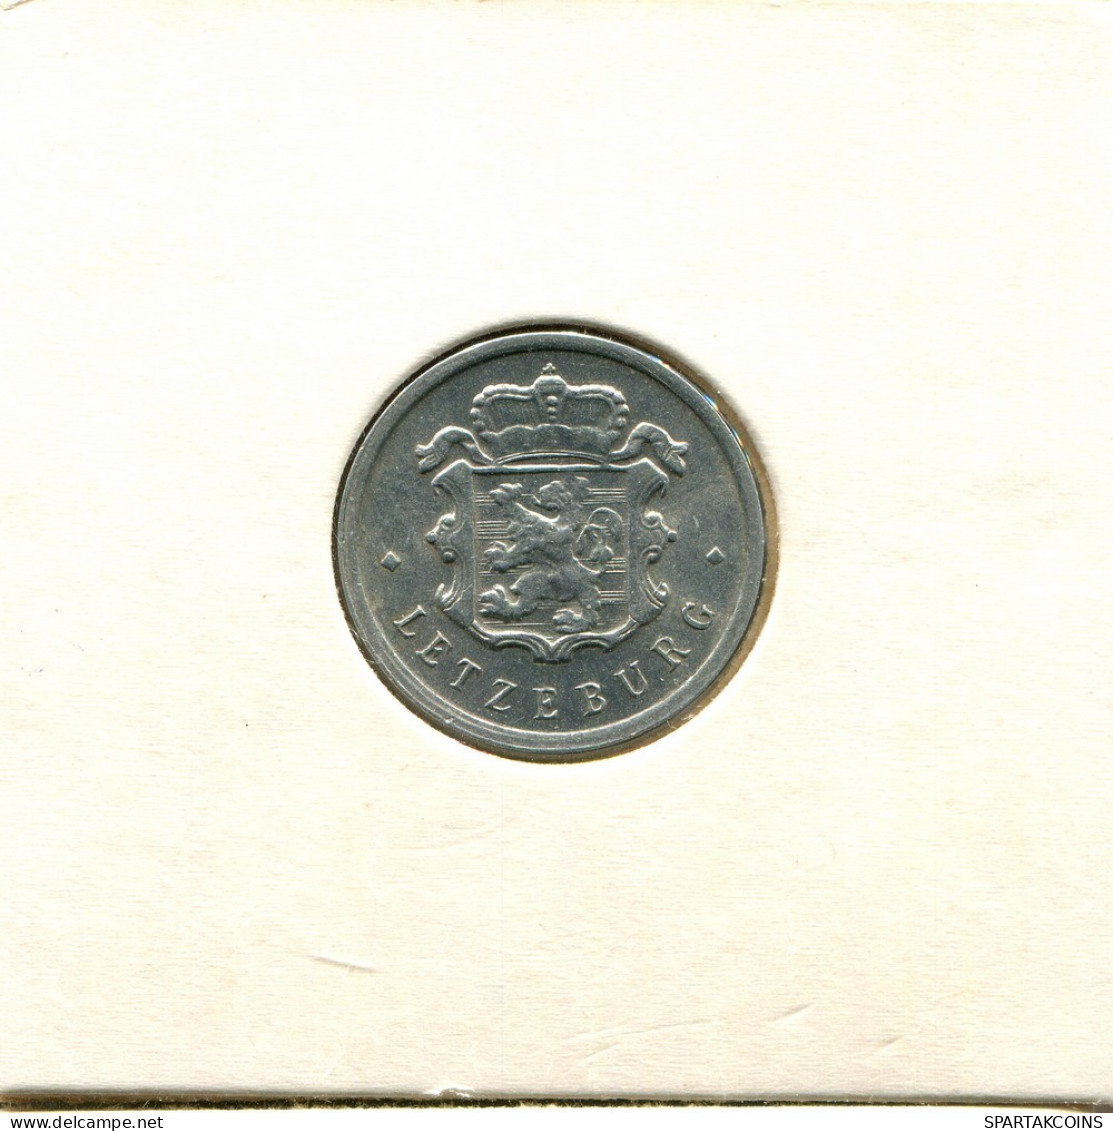 25 CENTIMES 1967 LUXEMBOURG Pièce #BA038.F.A - Lussemburgo